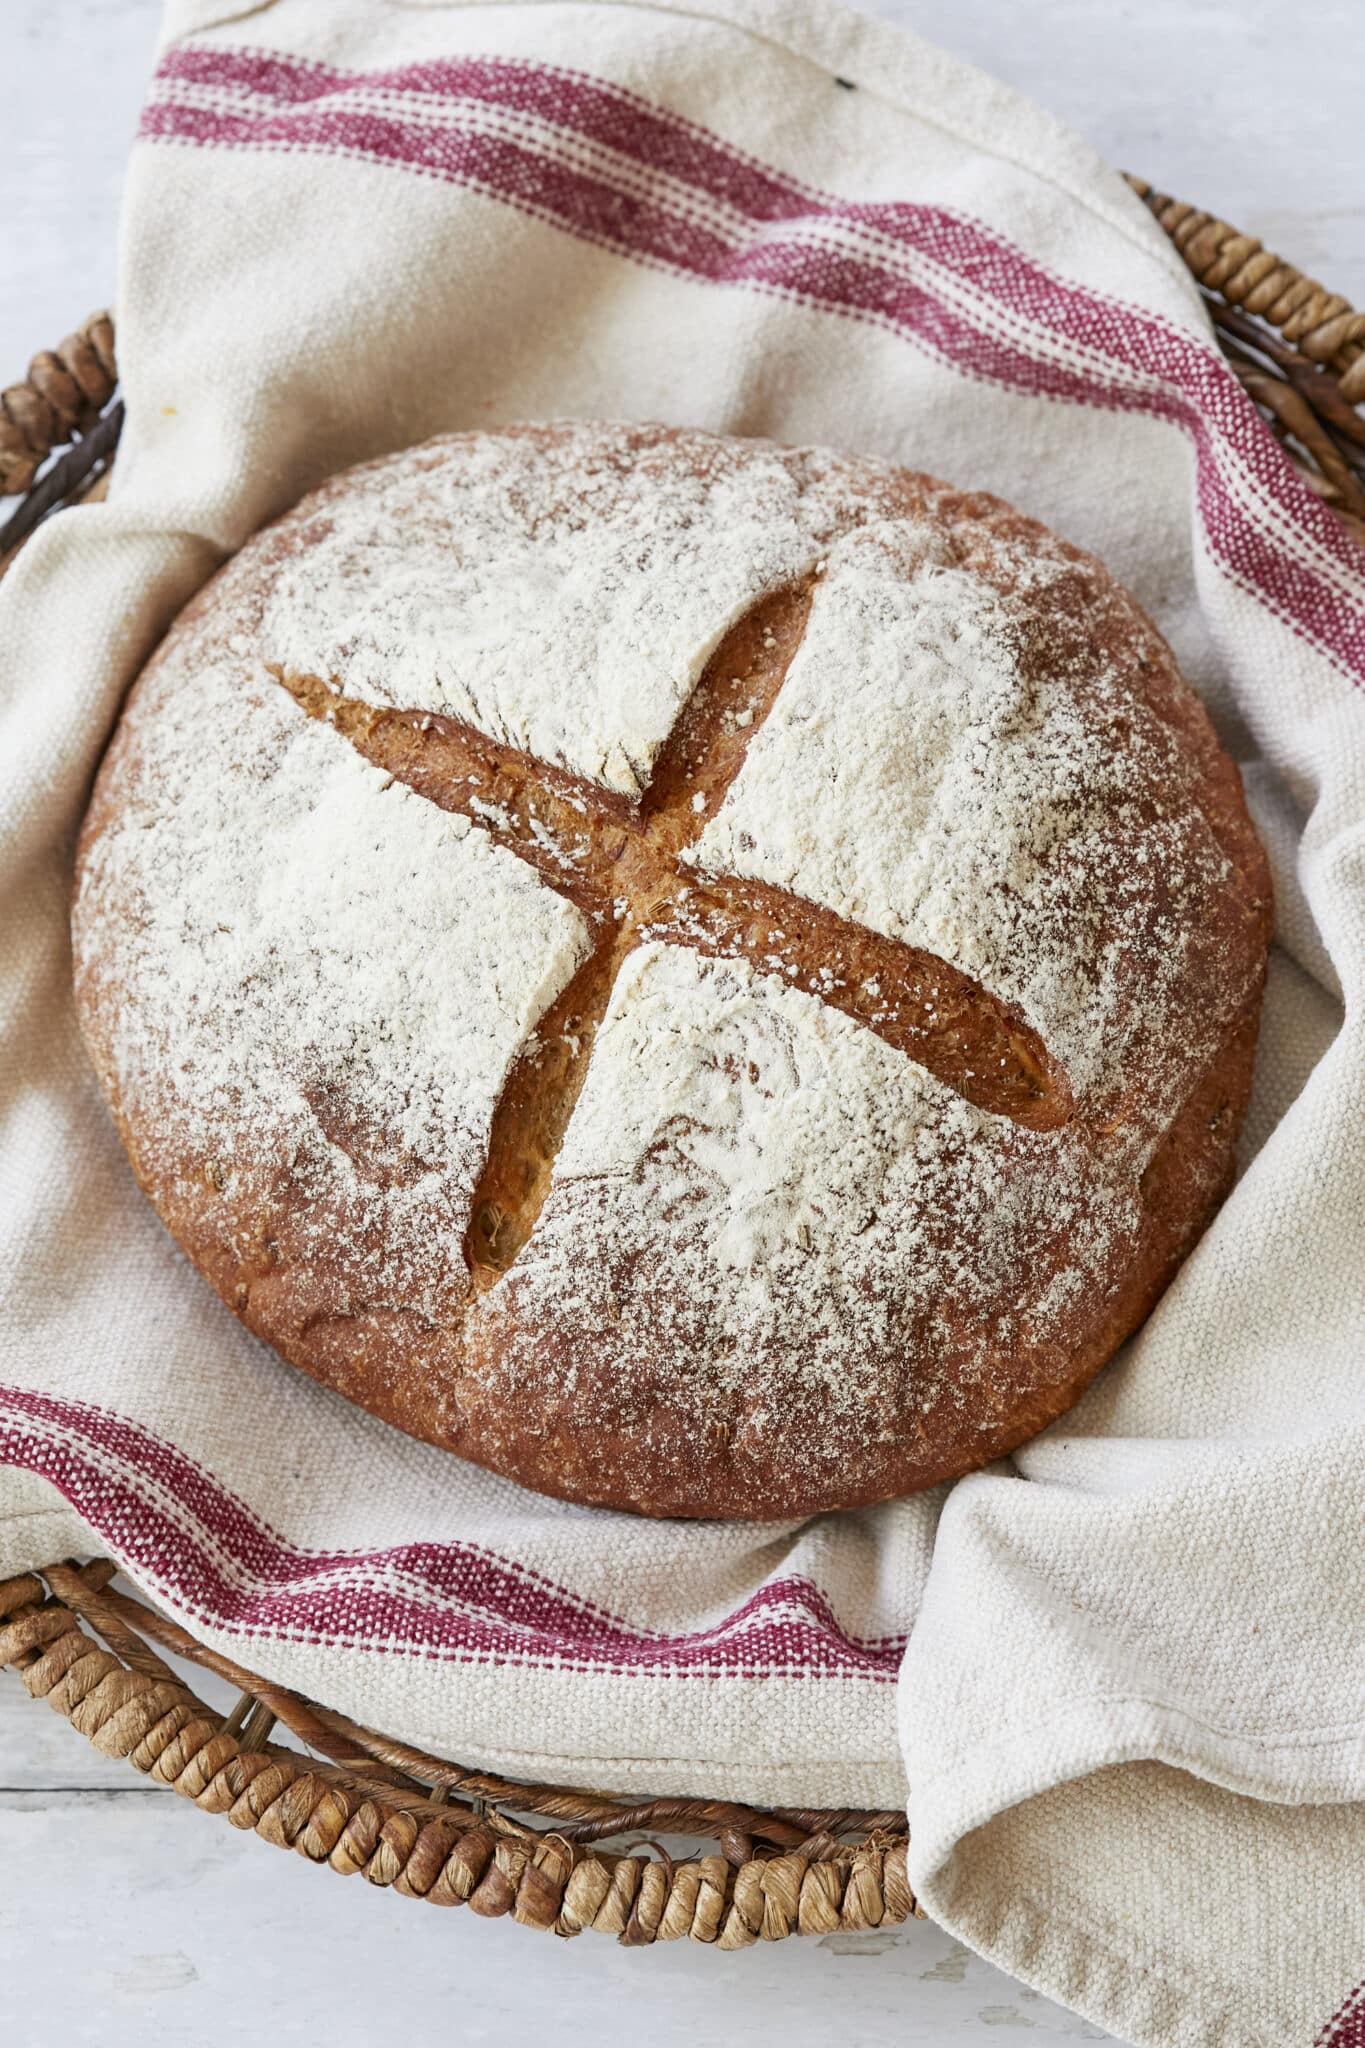 Joululimppu (Finnish Christmas Bread) is a spiced, subtly sweet rye bread and is baked in a round shape scored cross on top. It's dusted with flour and cooling in a basket lined with a kitchen towel. It's in dark brown reddish color. 